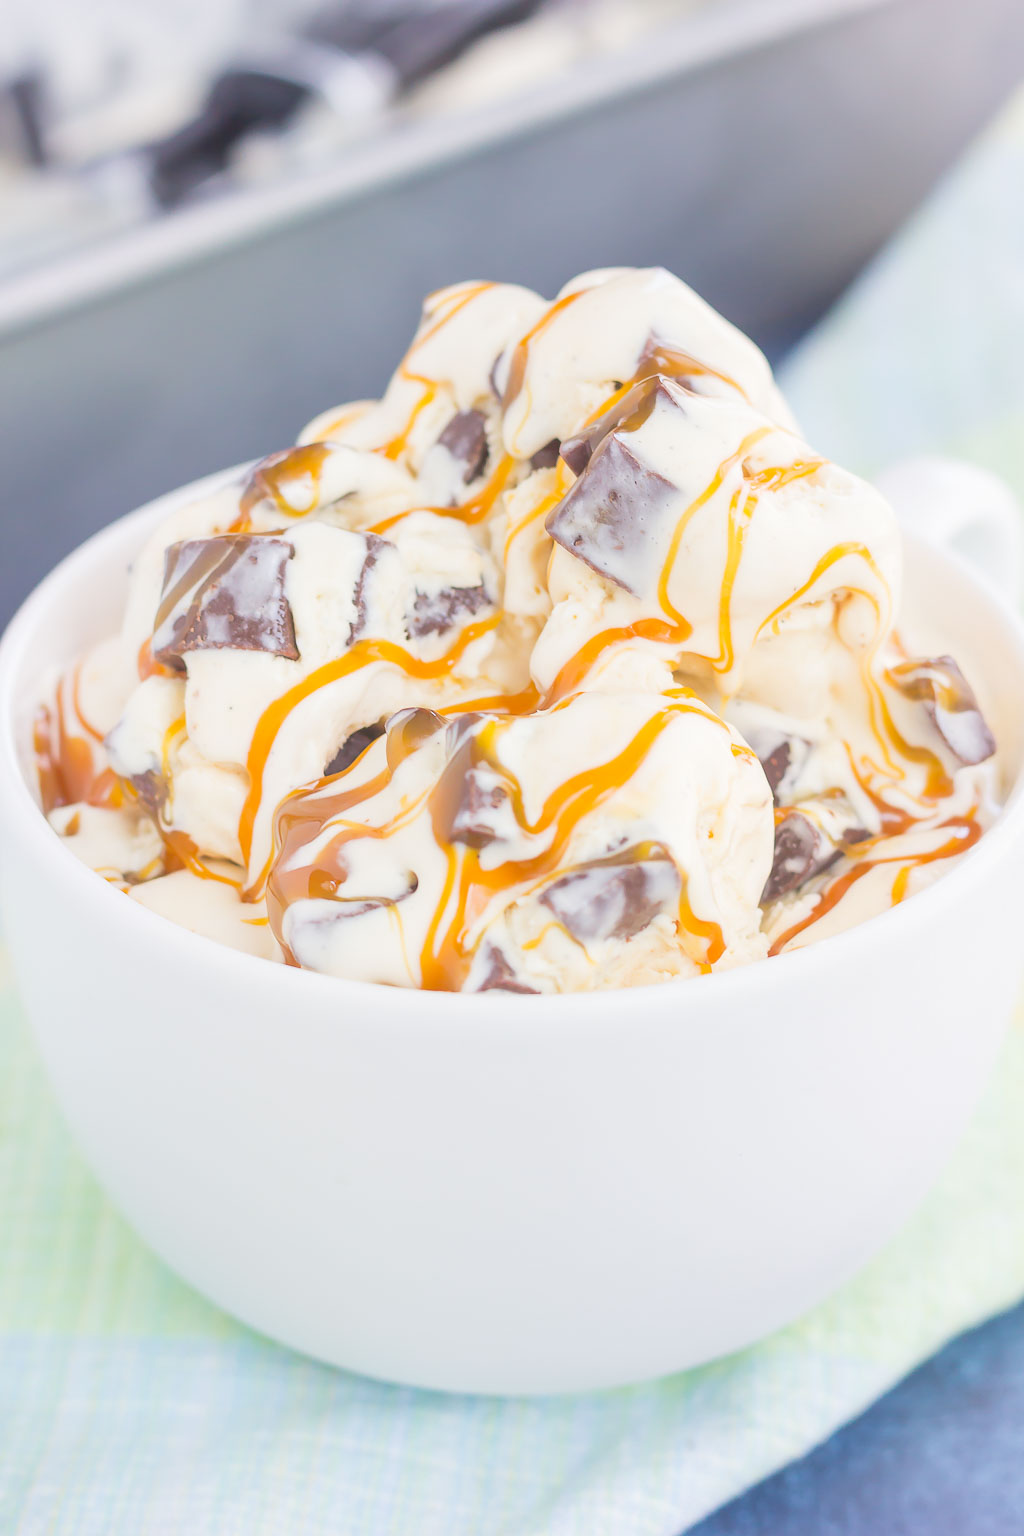 This {No-Churn} Salted Caramel Chocolate Chunk Ice Cream is a simple, must-make treat for the summer. Sweet vanilla ice cream is swirled with rich, salted caramel and loaded with chunks of chocolate. Easy to make and with no ice cream maker needed, you can have this decadent dessert ready in no time!